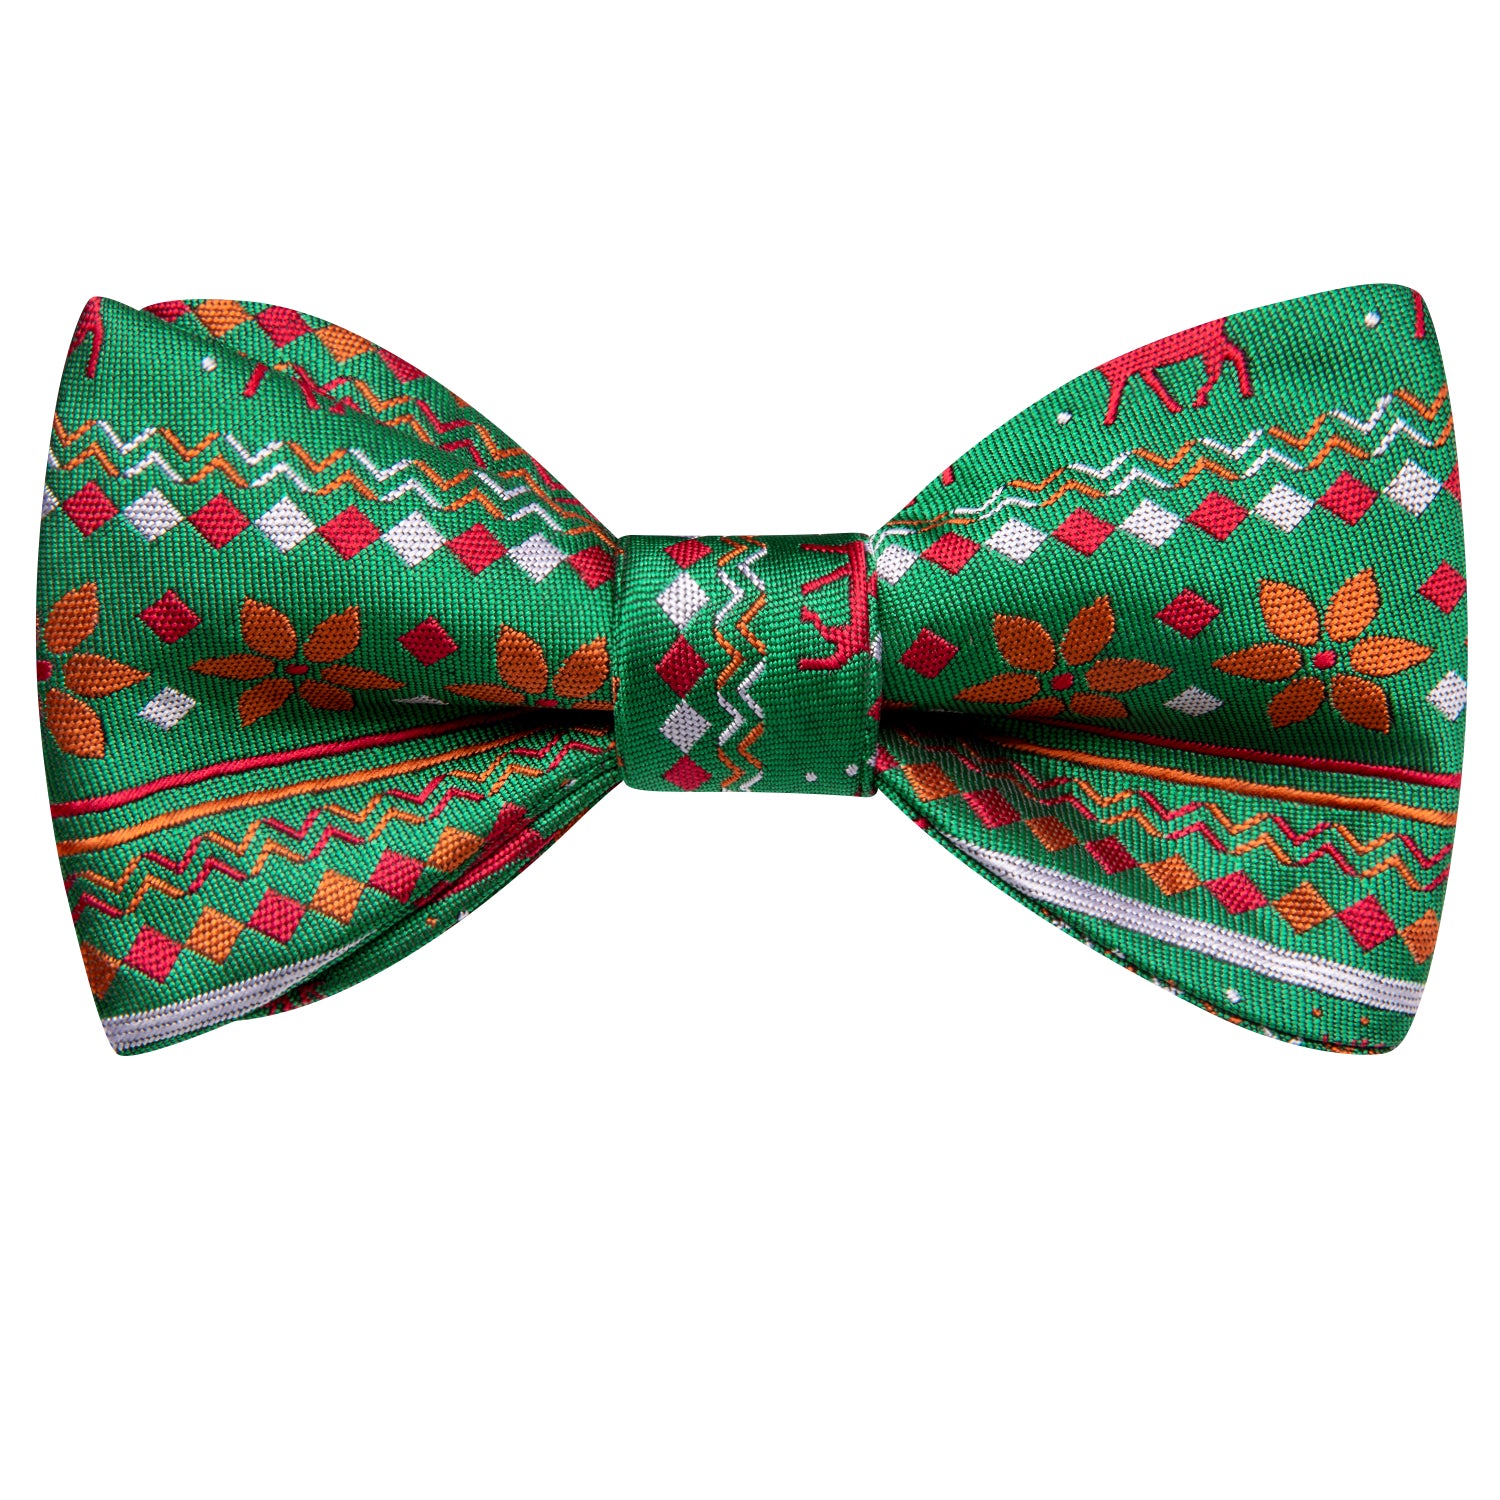 Green Red Christmas Novelty Self-tied Bow Tie Hanky Cufflinks Set